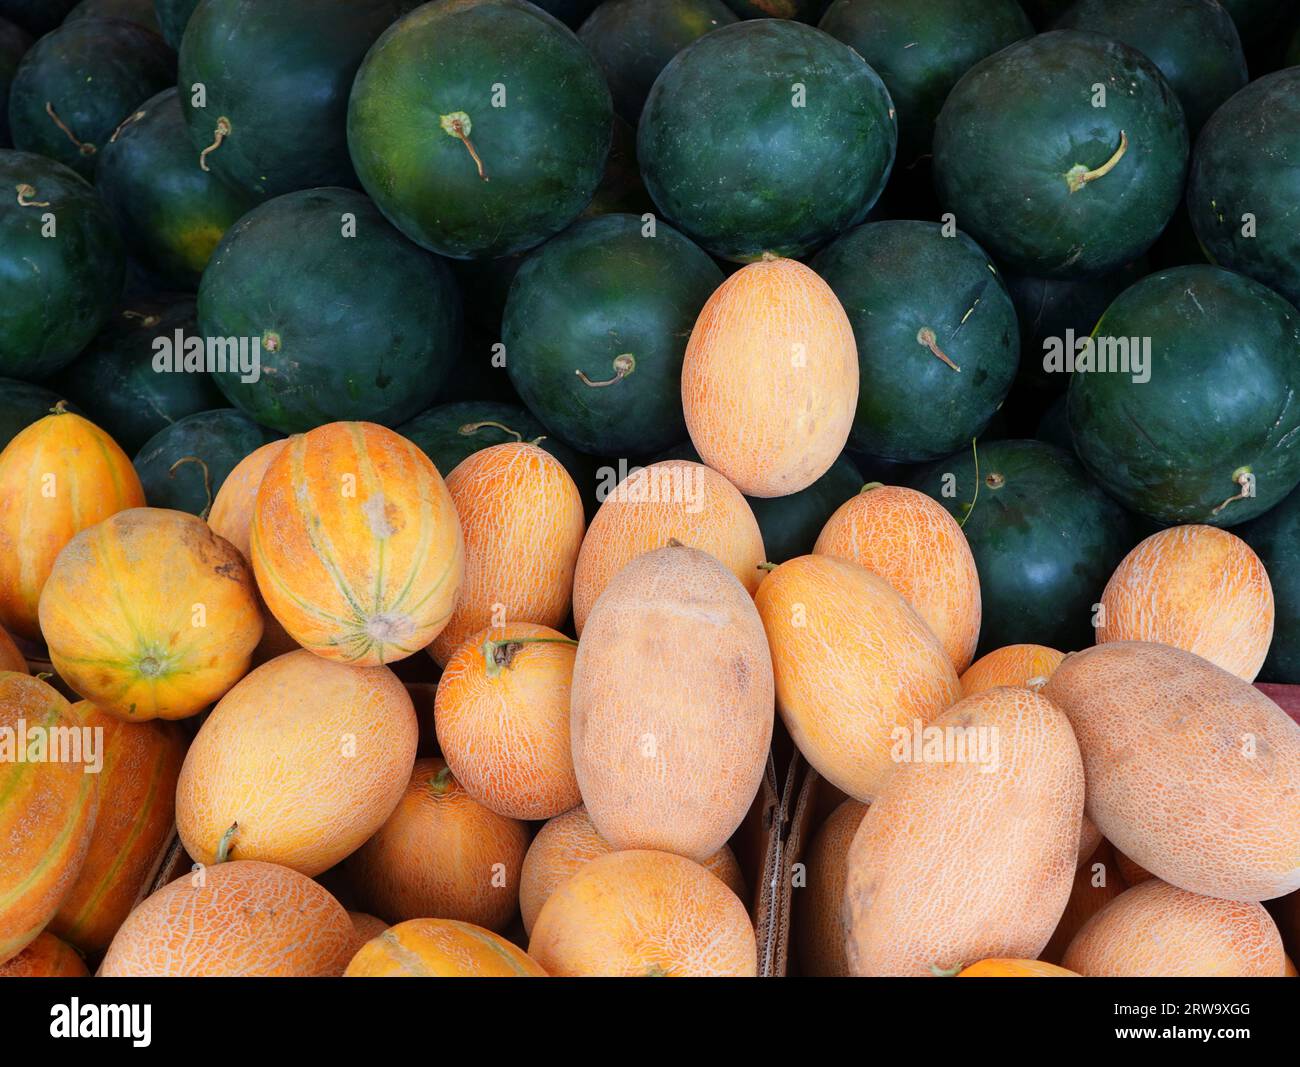 Pile of ripe and fresh yellow melons and green watermelons at agricultural market Stock Photo